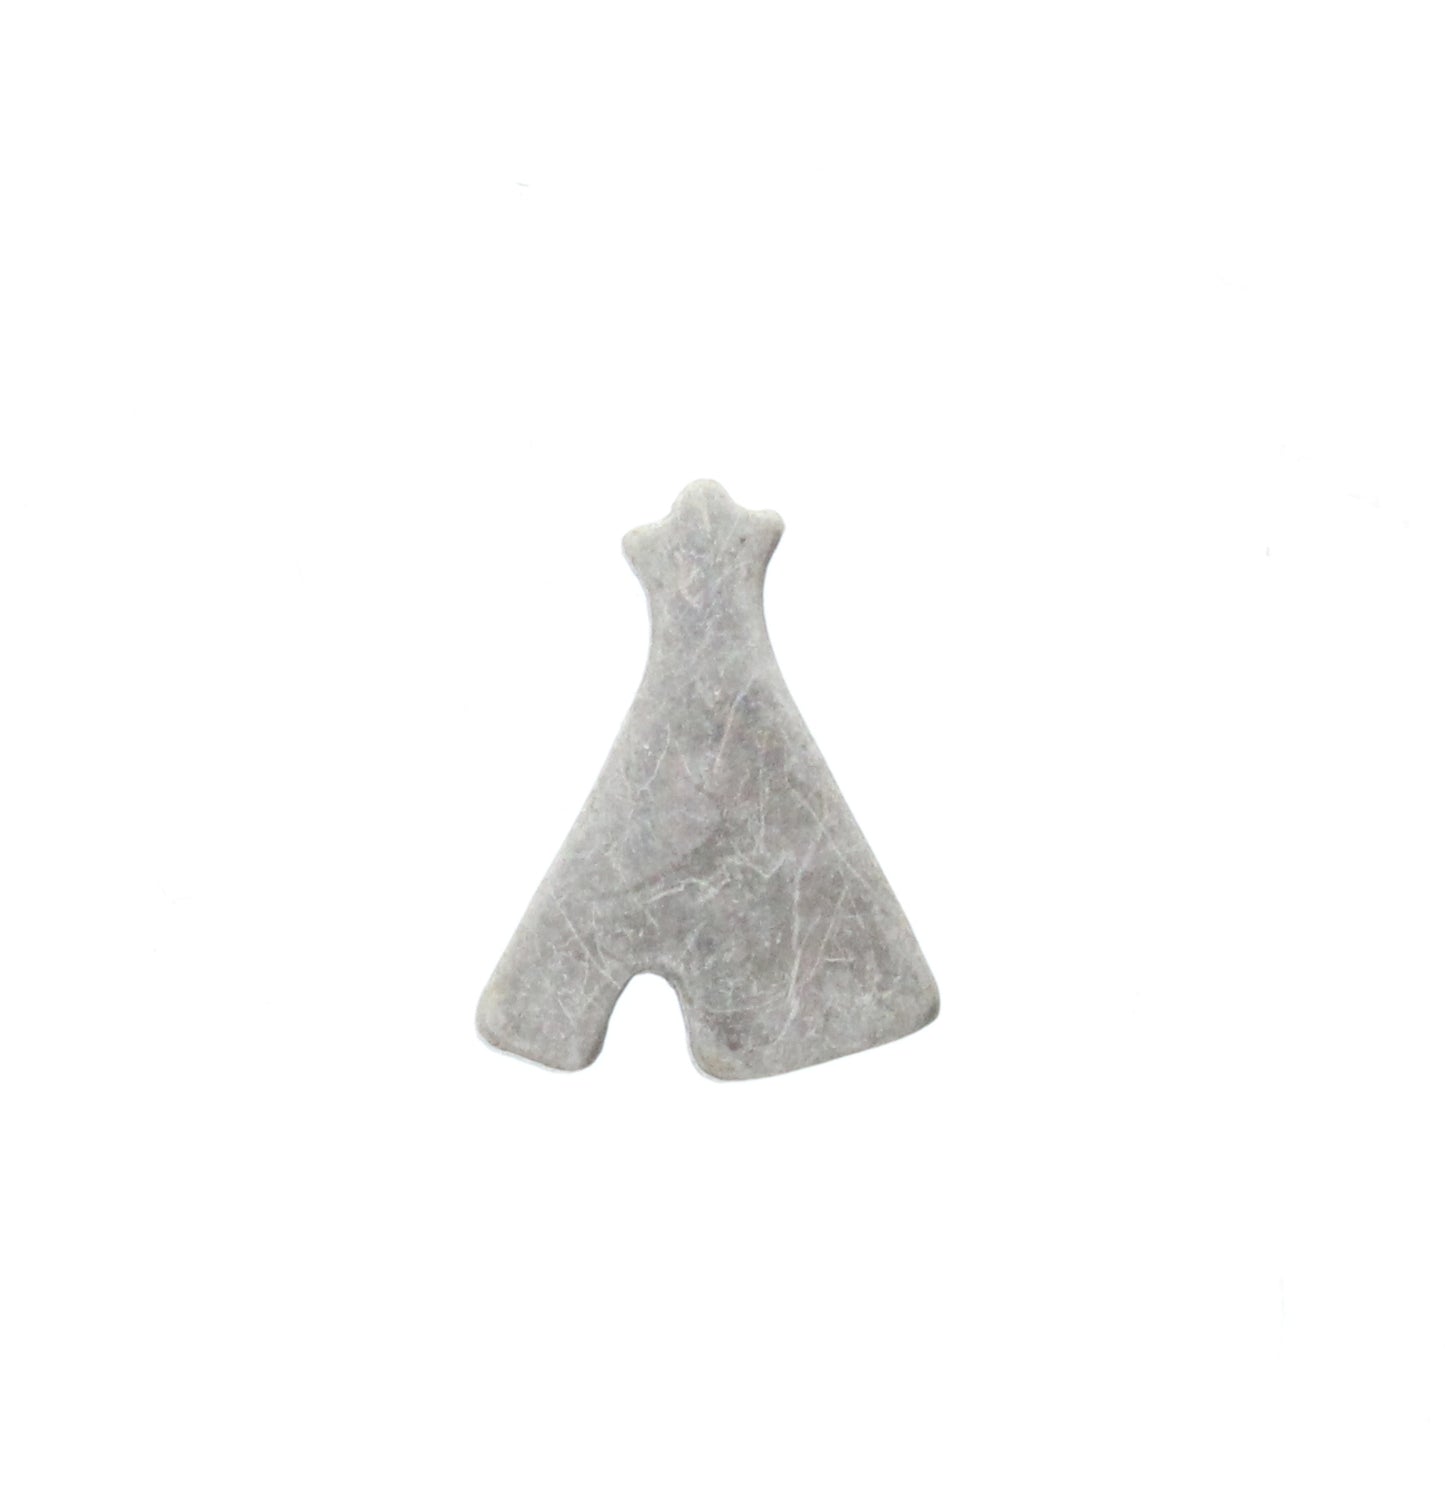 Teepee Silhouette Charm Stamping, Antique Silver Finish, Pk/3